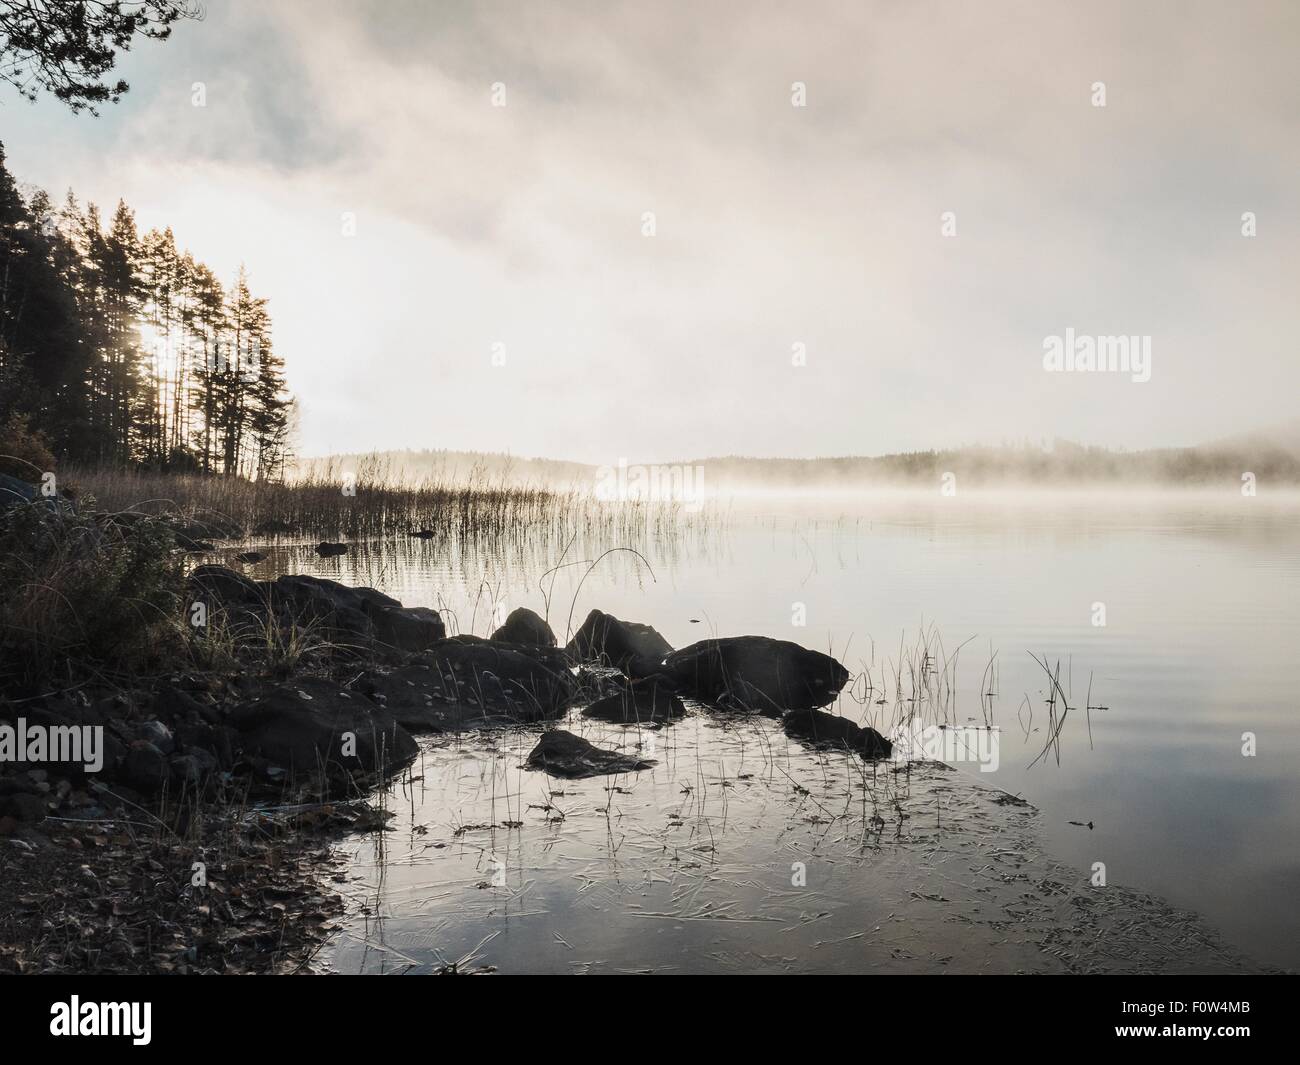 Silhouetted rocks and reeds on misty lakeside at sunrise, Orivesi, Finland Stock Photo